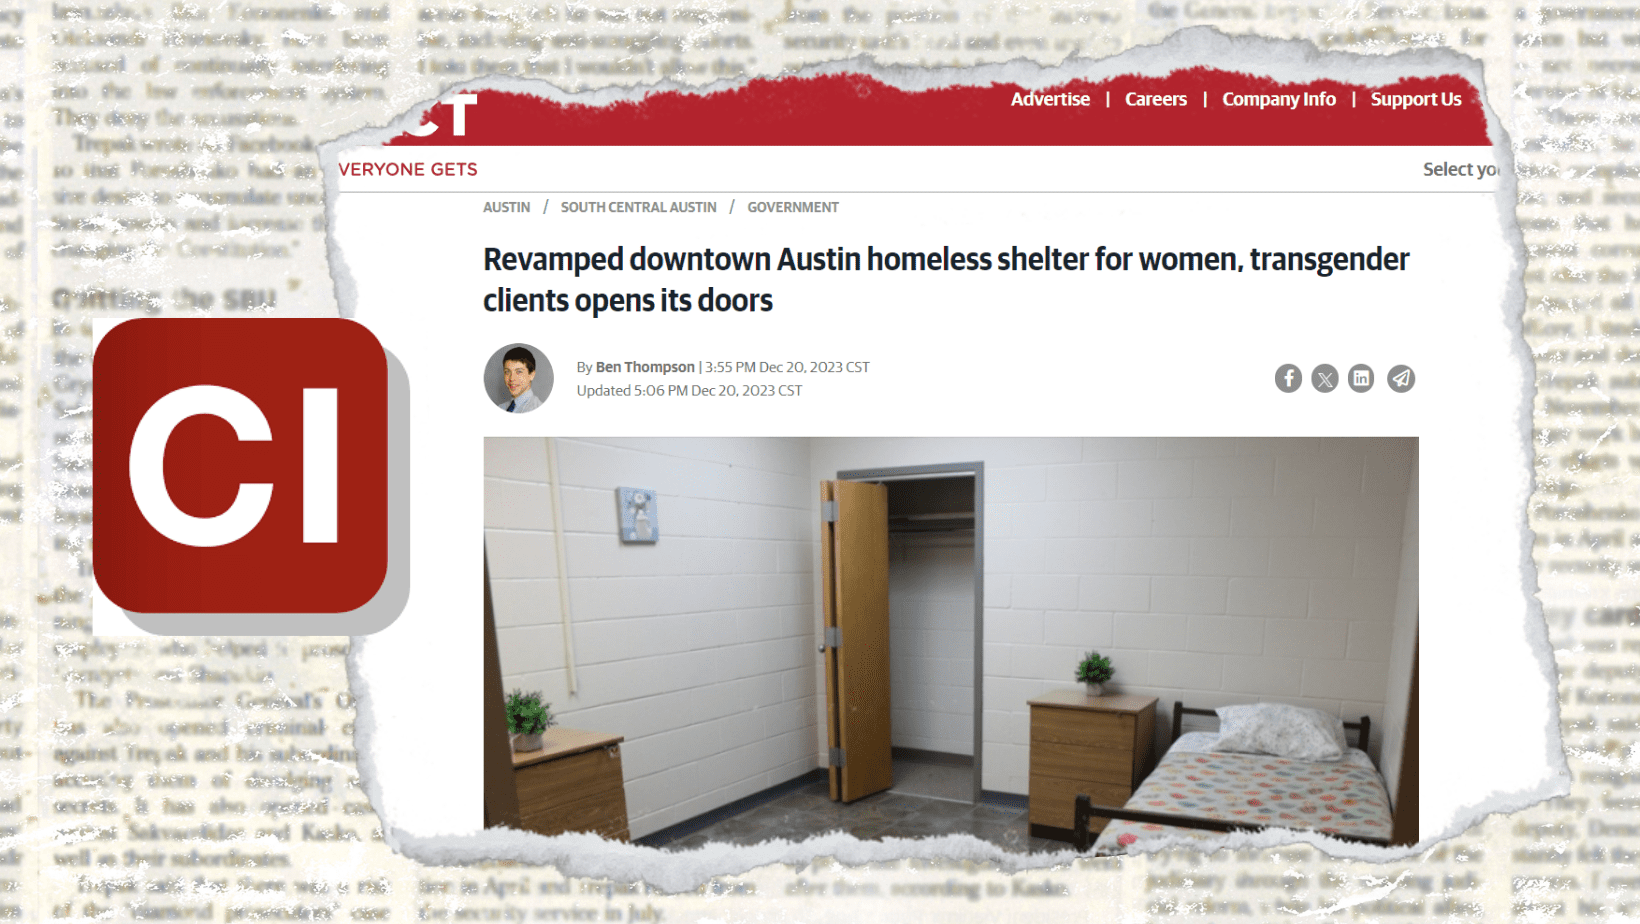 Newsprint background with Community Impact logo and screenshot of article with the headline "Revamped downtown Austin homeless shelter for women, transgender clients opens its doors"